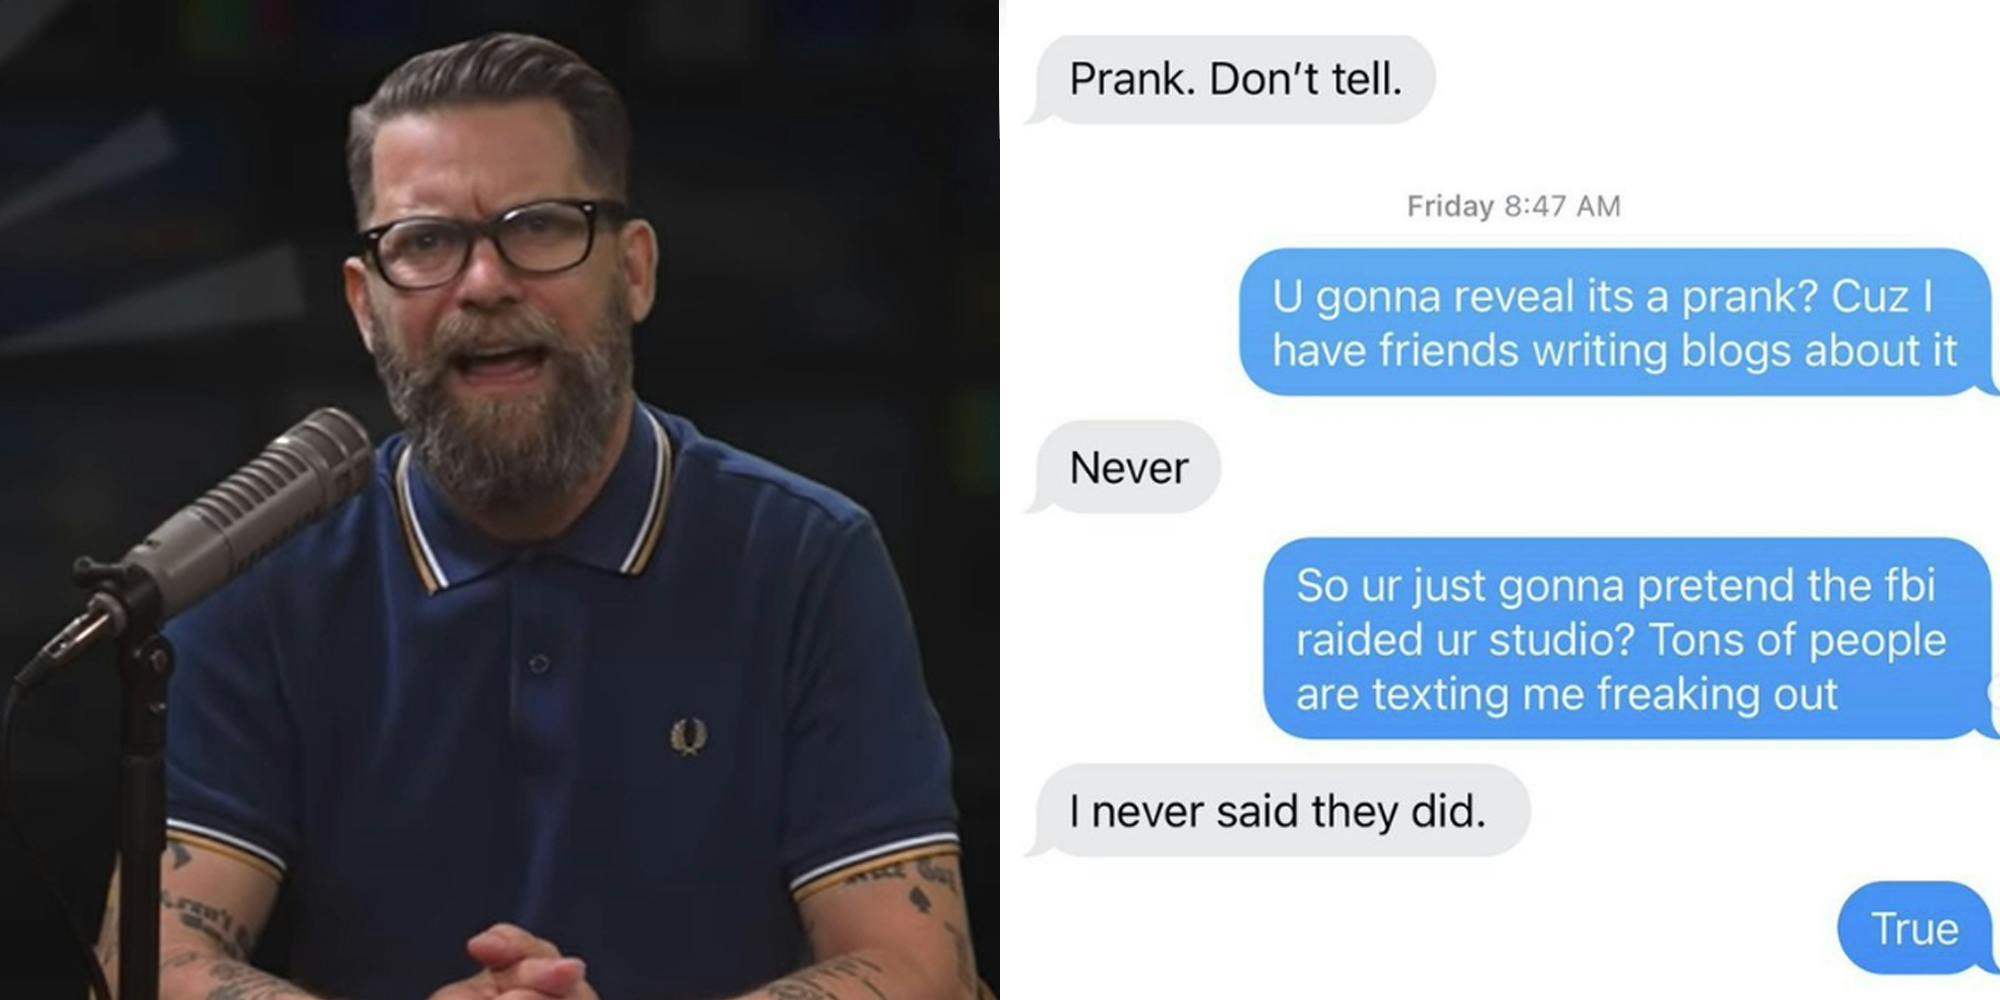 Gavin McInnes speaking into microphone (l) Text messages caption "Prank. Don't tell. U gonna reveal its a prank? Cuz I have friends writing blogs about it Never So ur just gonna pretend the fbi raided ur studio? Tons of people are texting me freaking out I never said they did. True" (r)